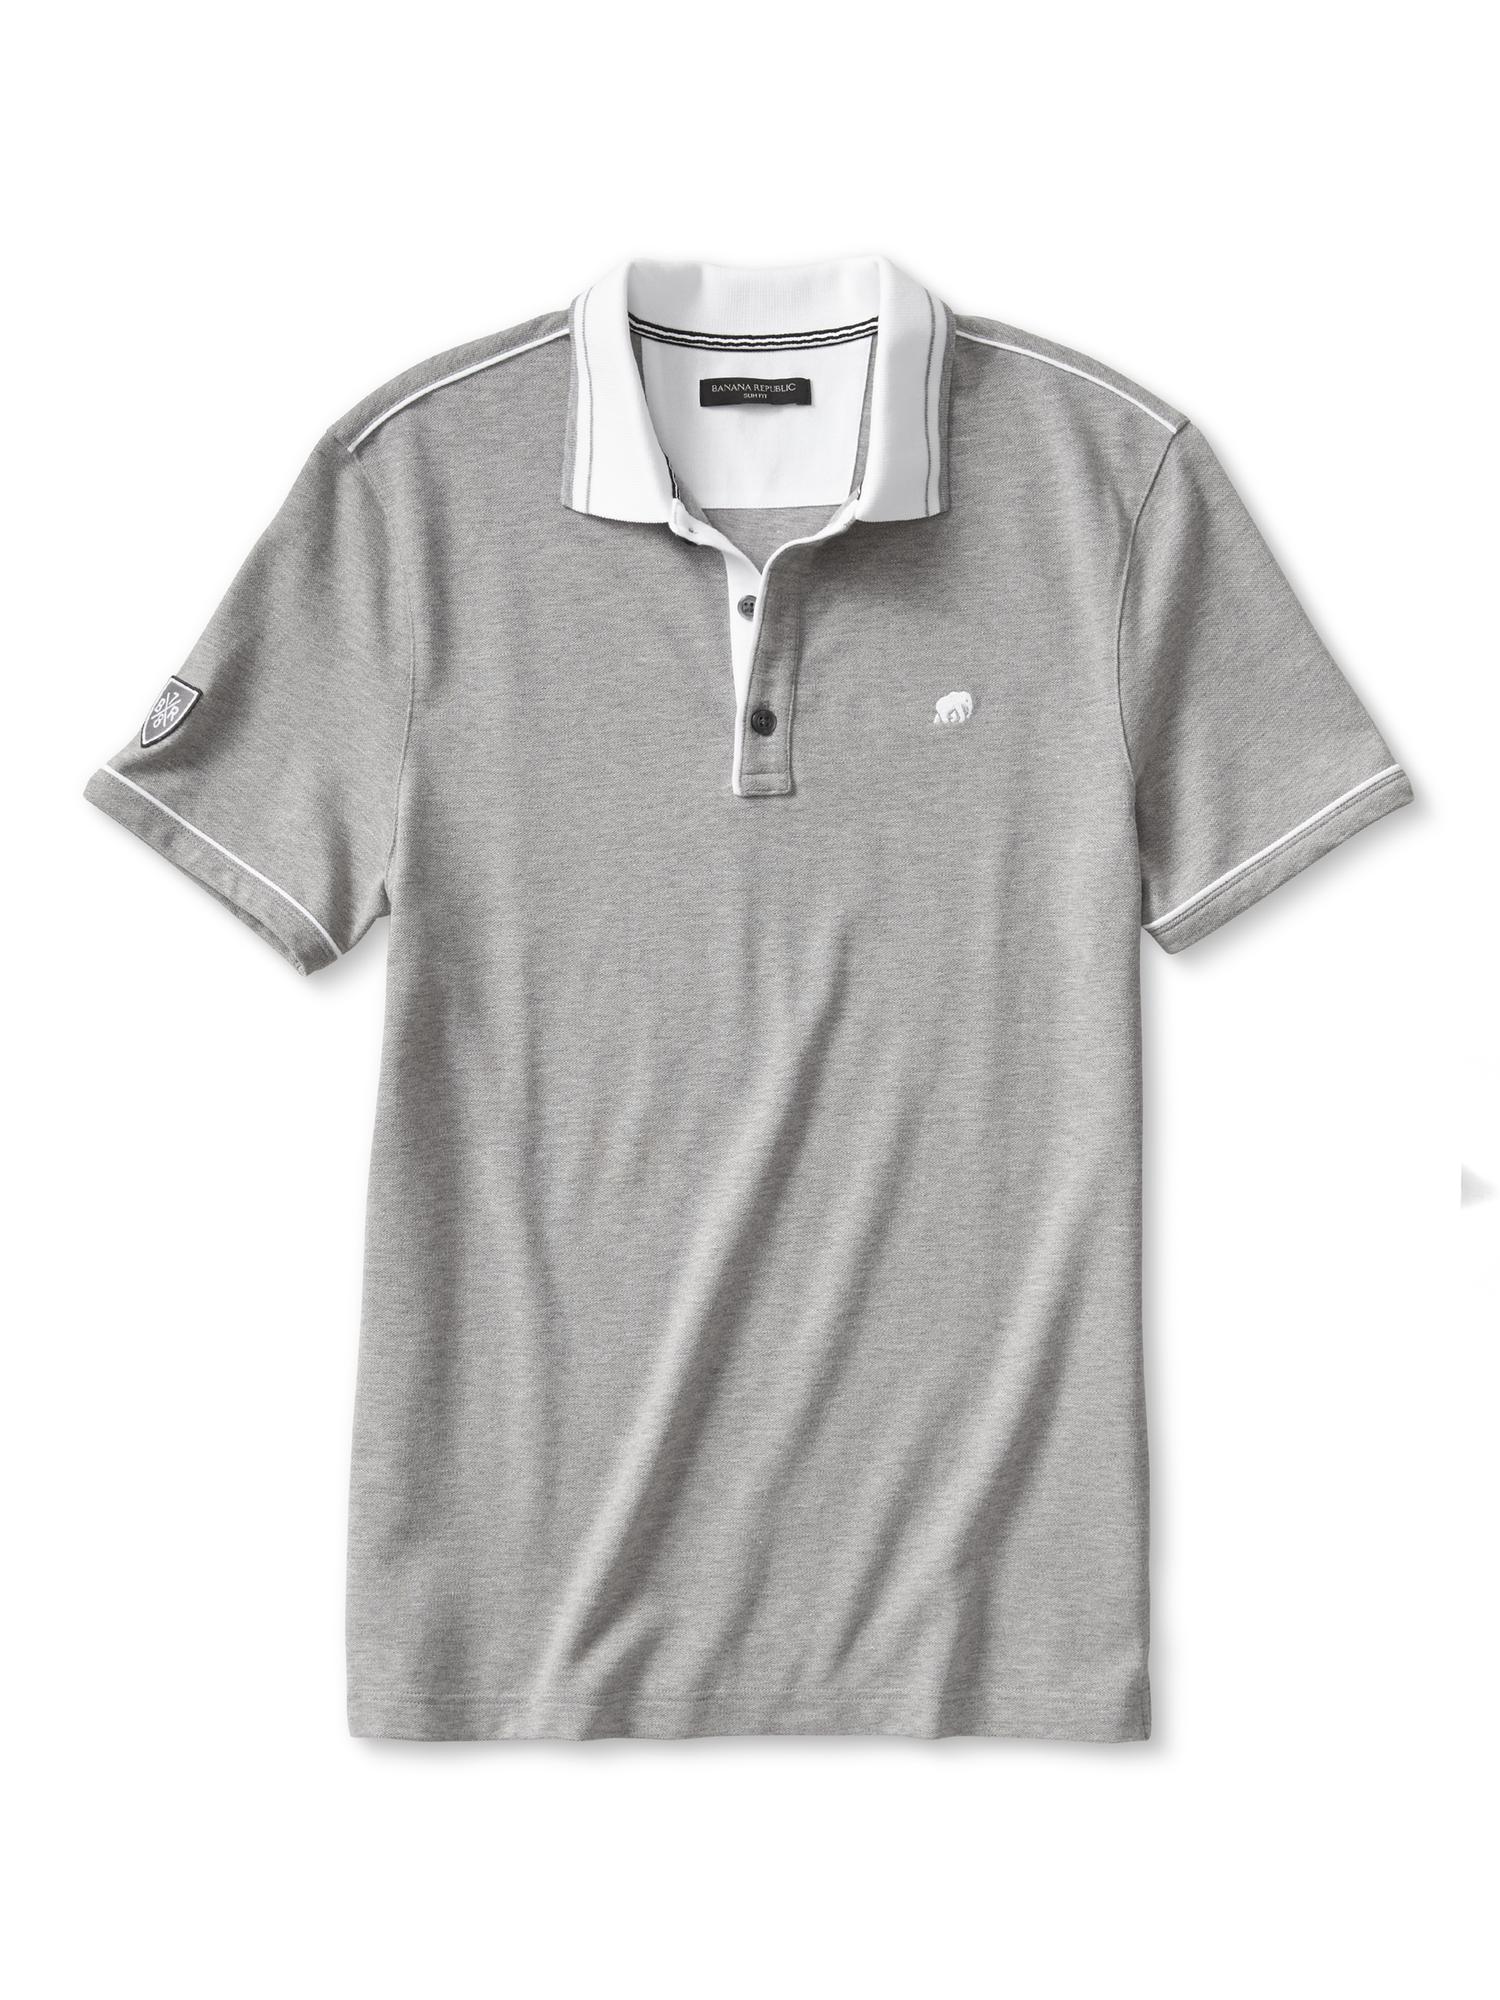 Slim-Fit Piped Pique Polo